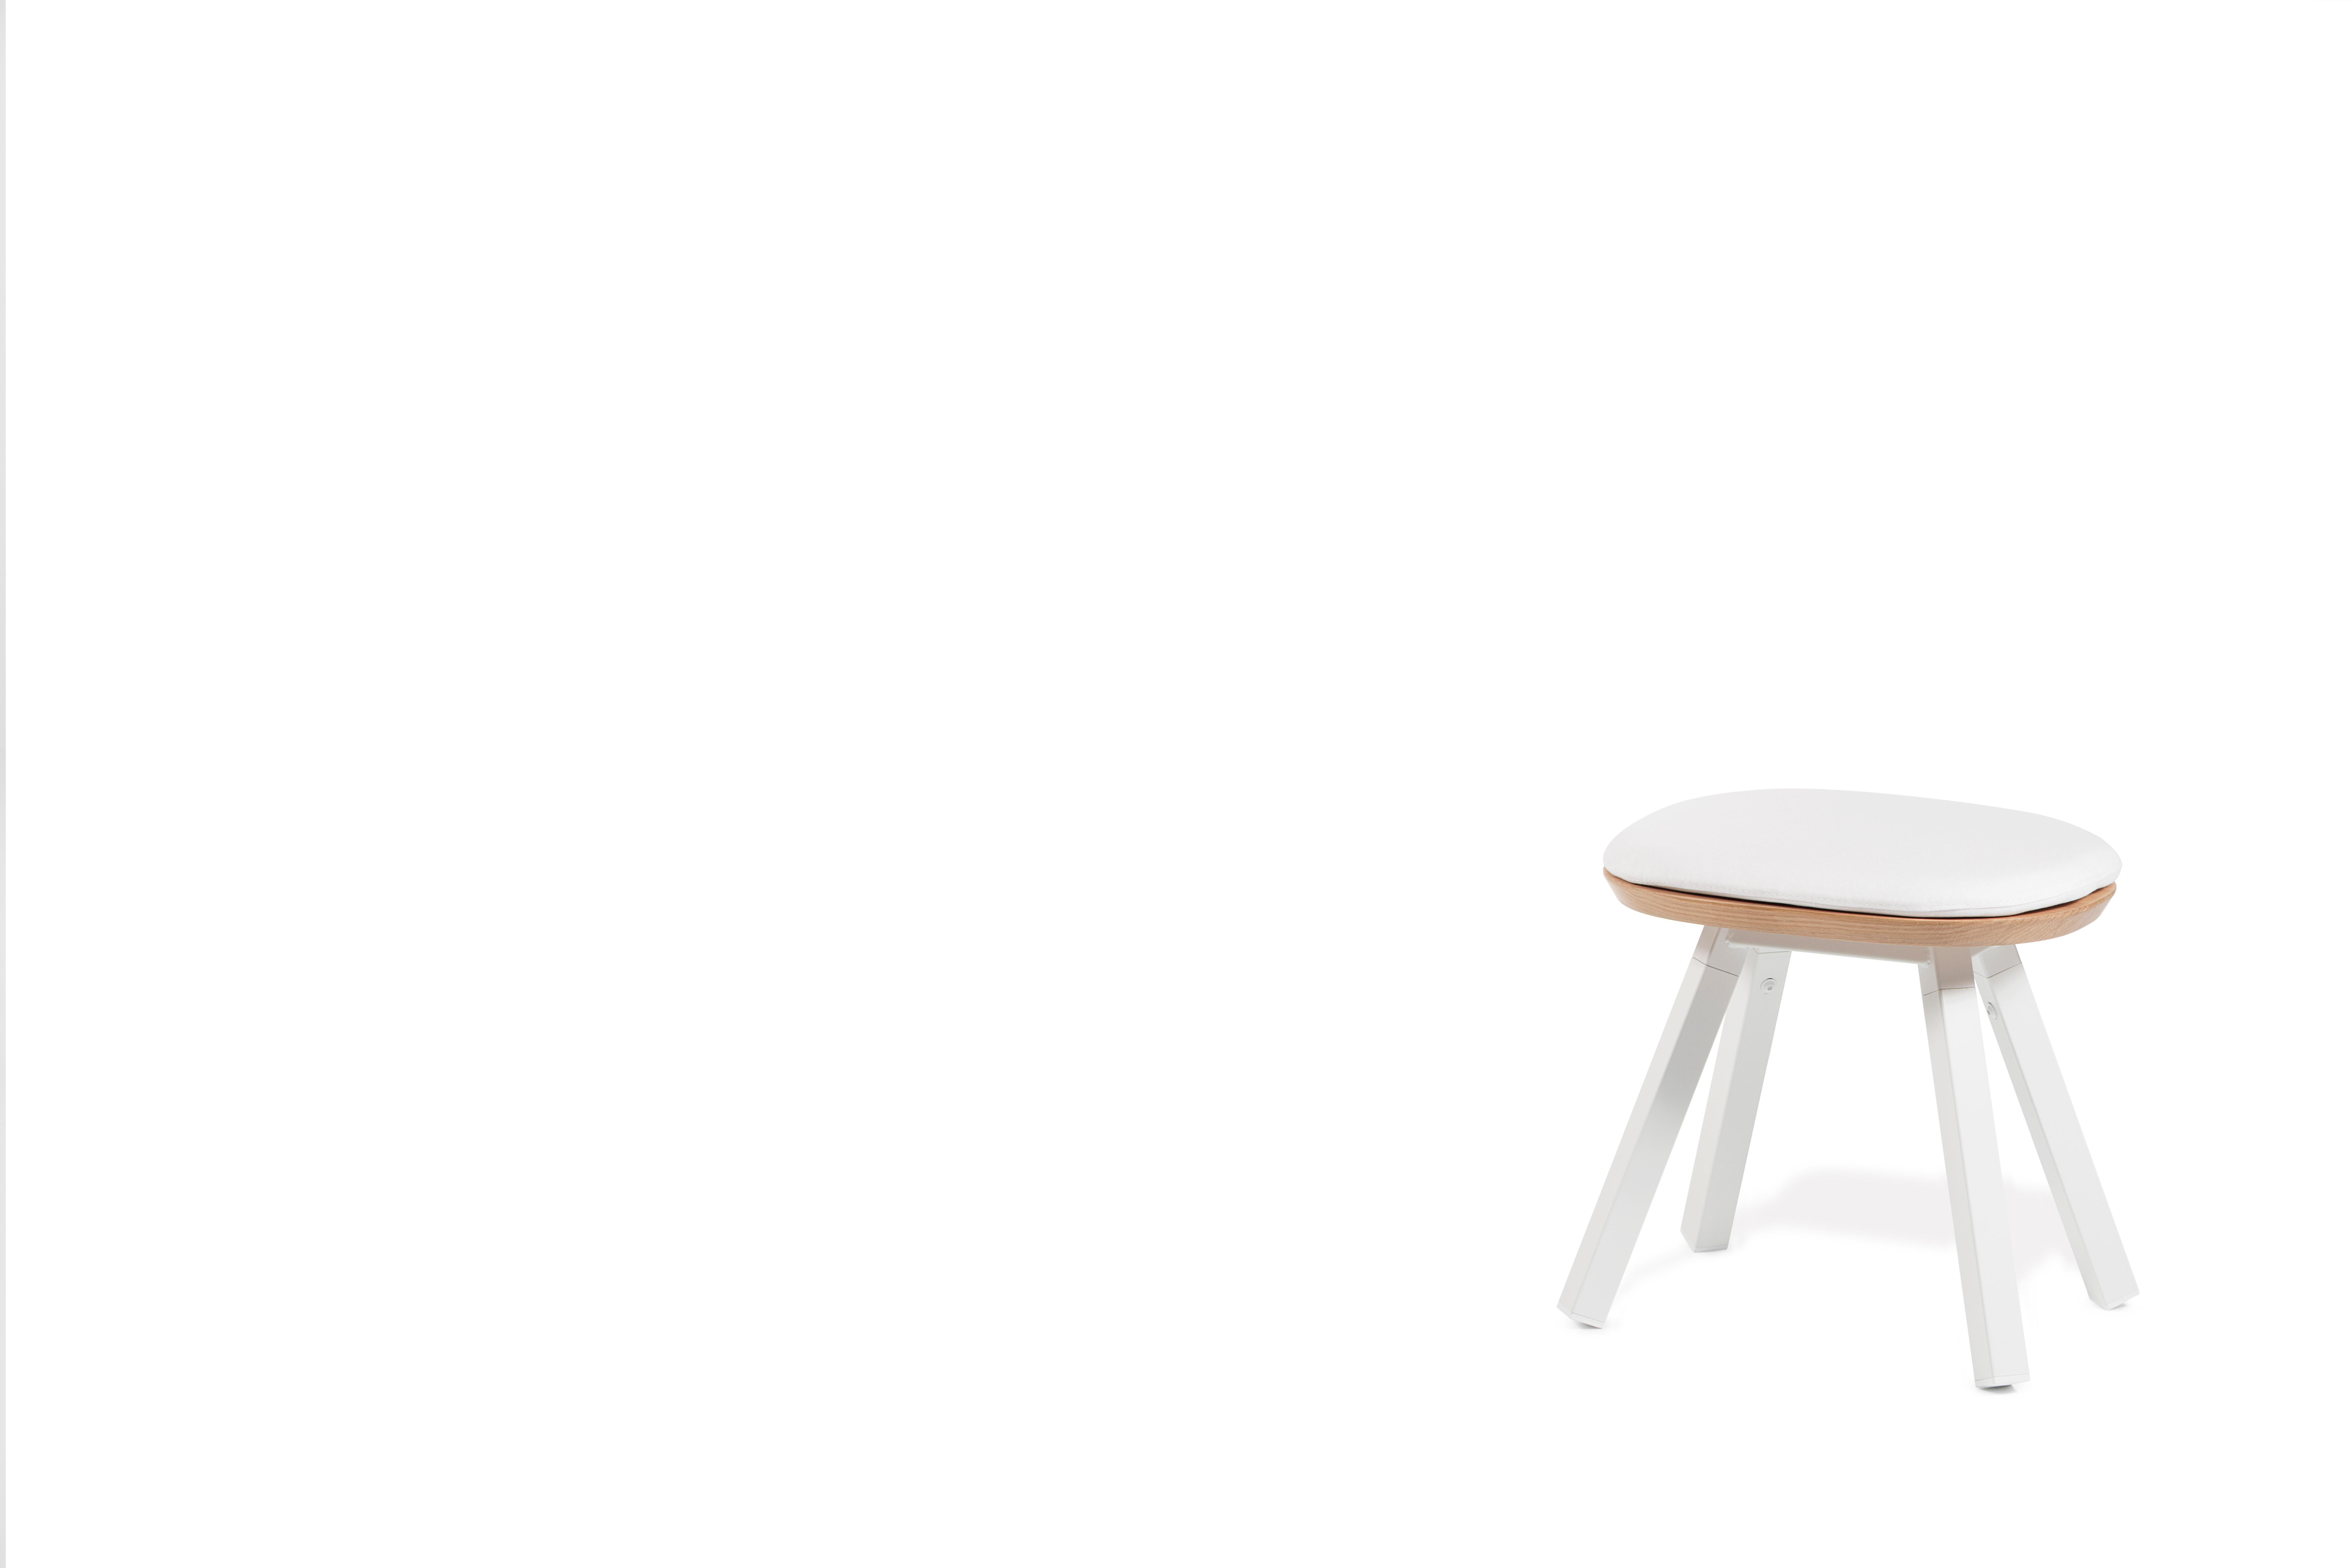 Spanish RS Barcelona You and Me Stool in Oak and White by A.P.O. For Sale